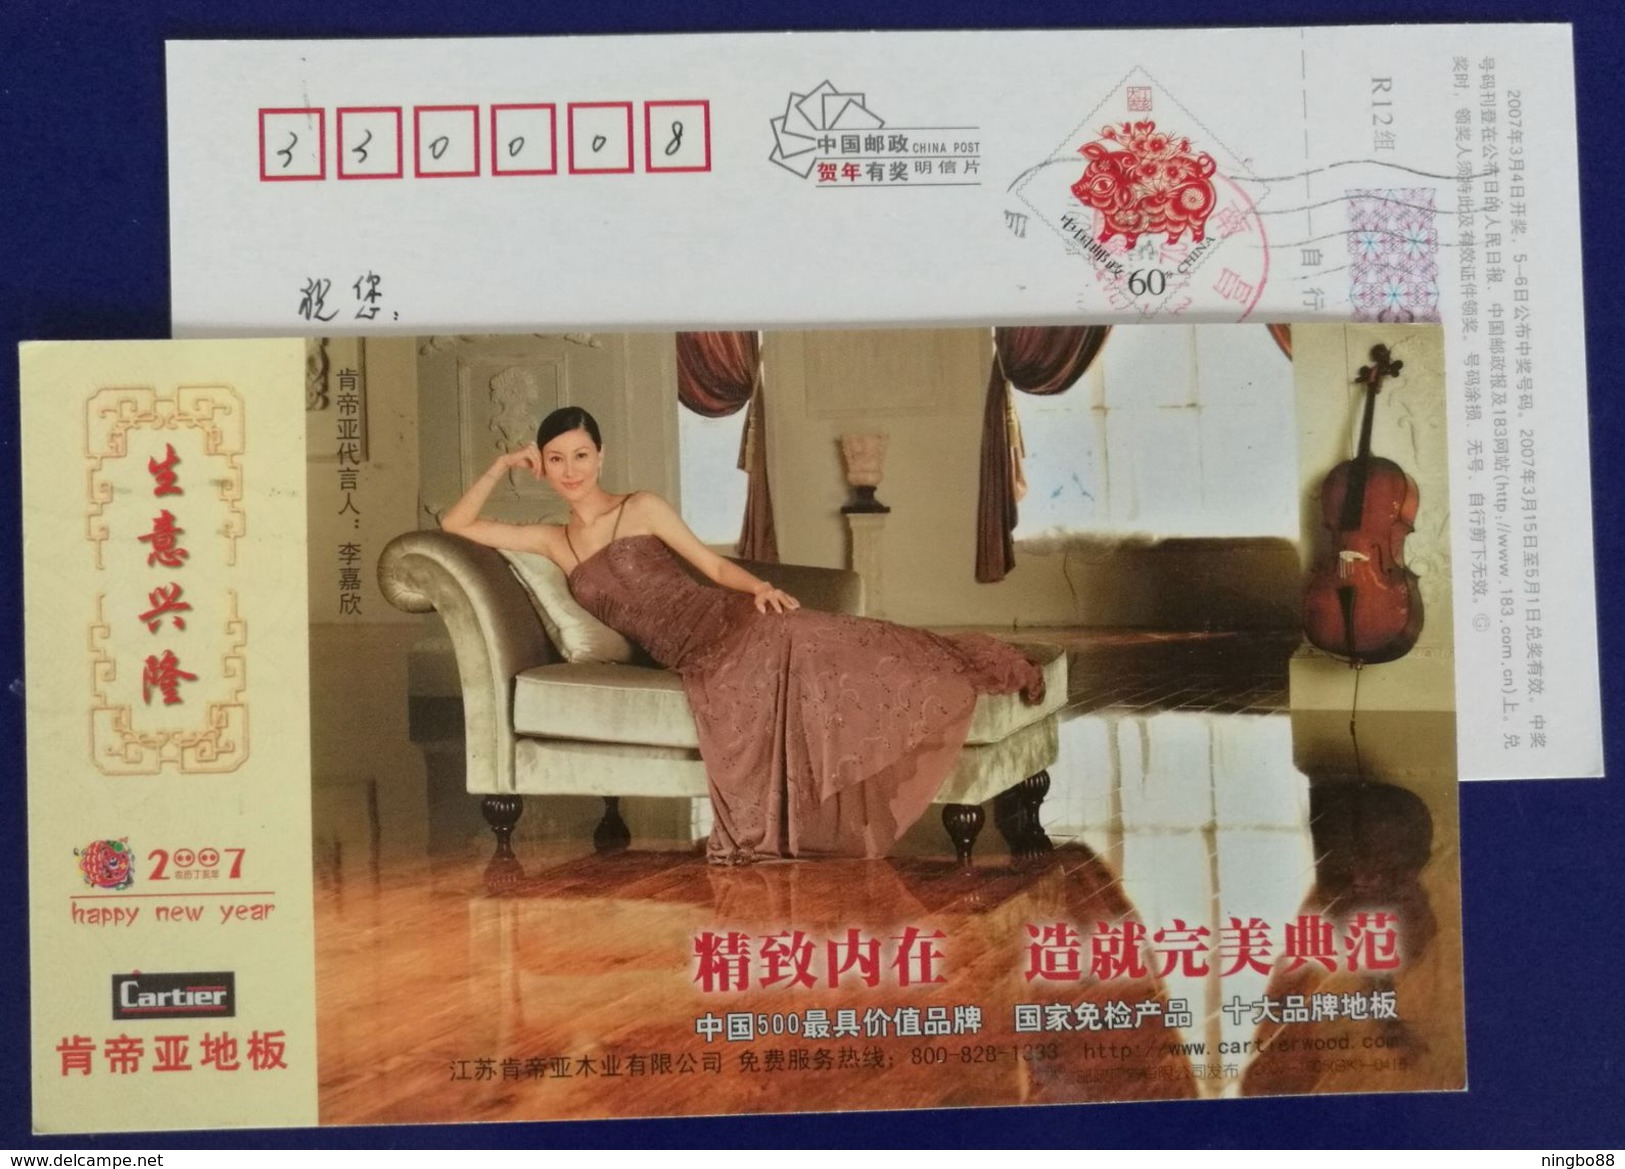 Musical Instrument Cello,China 2007 State Inspection Exemption Product Cartier Wooden Floor Advert Pre-stamped Card - Music